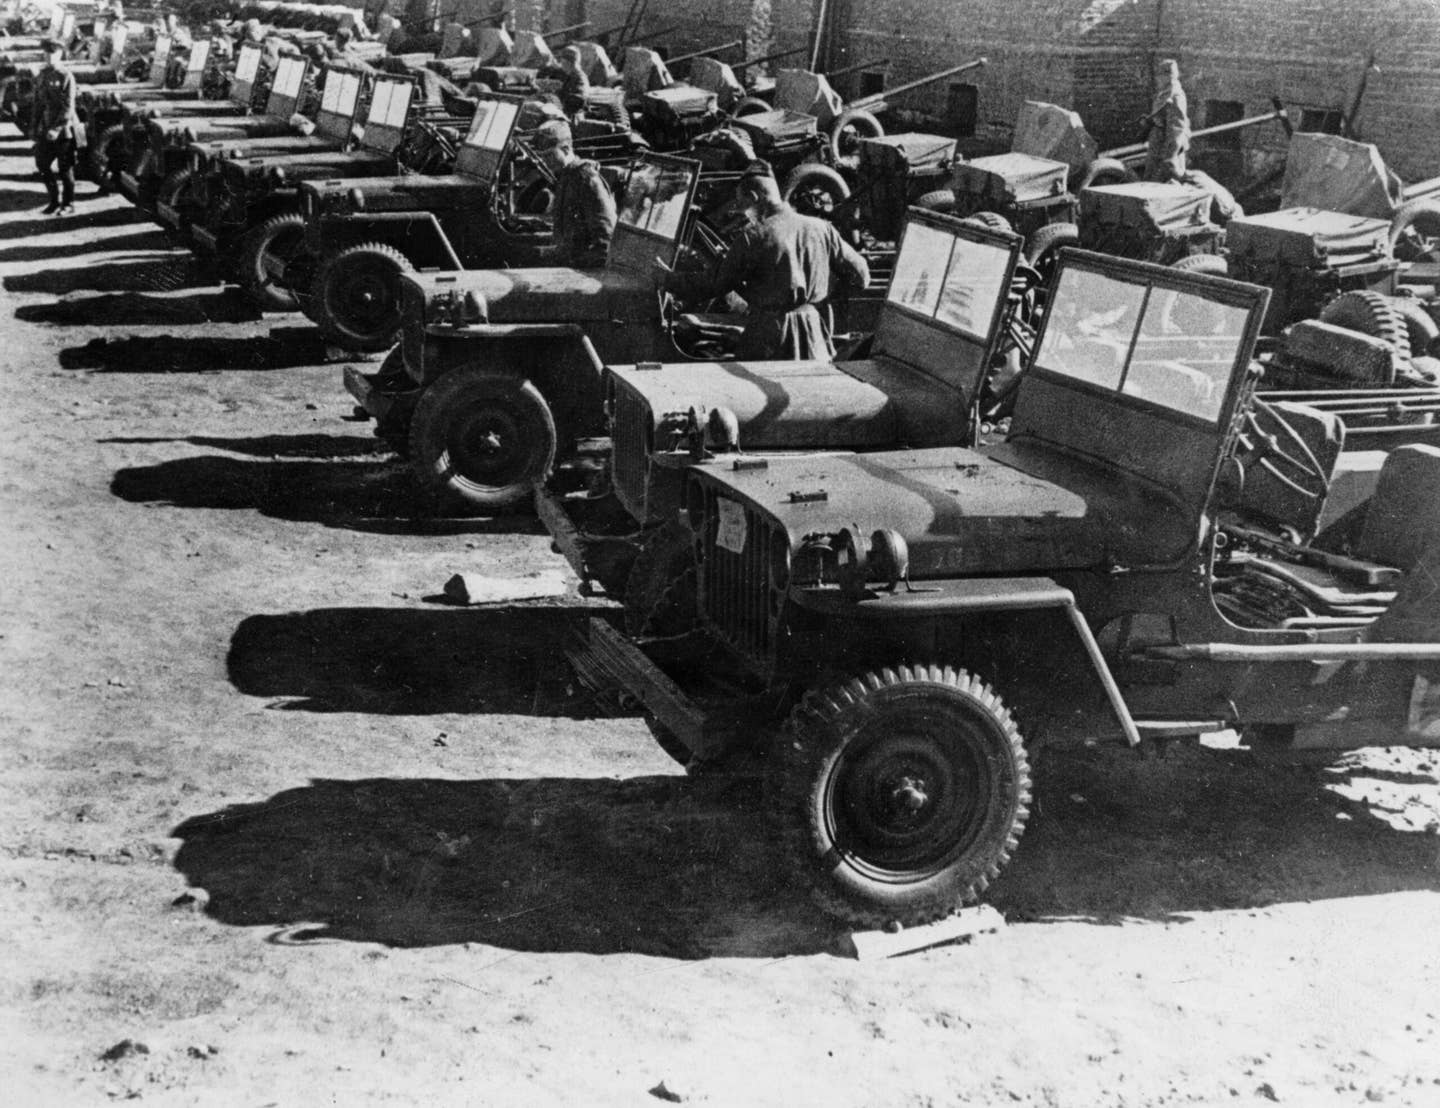 Soviet Red Army soldiers with US-made jeeps on the way to the front, World War II  as part of the American lend-lease program. Photo by: Sovfoto/Universal Images Group via Getty Images